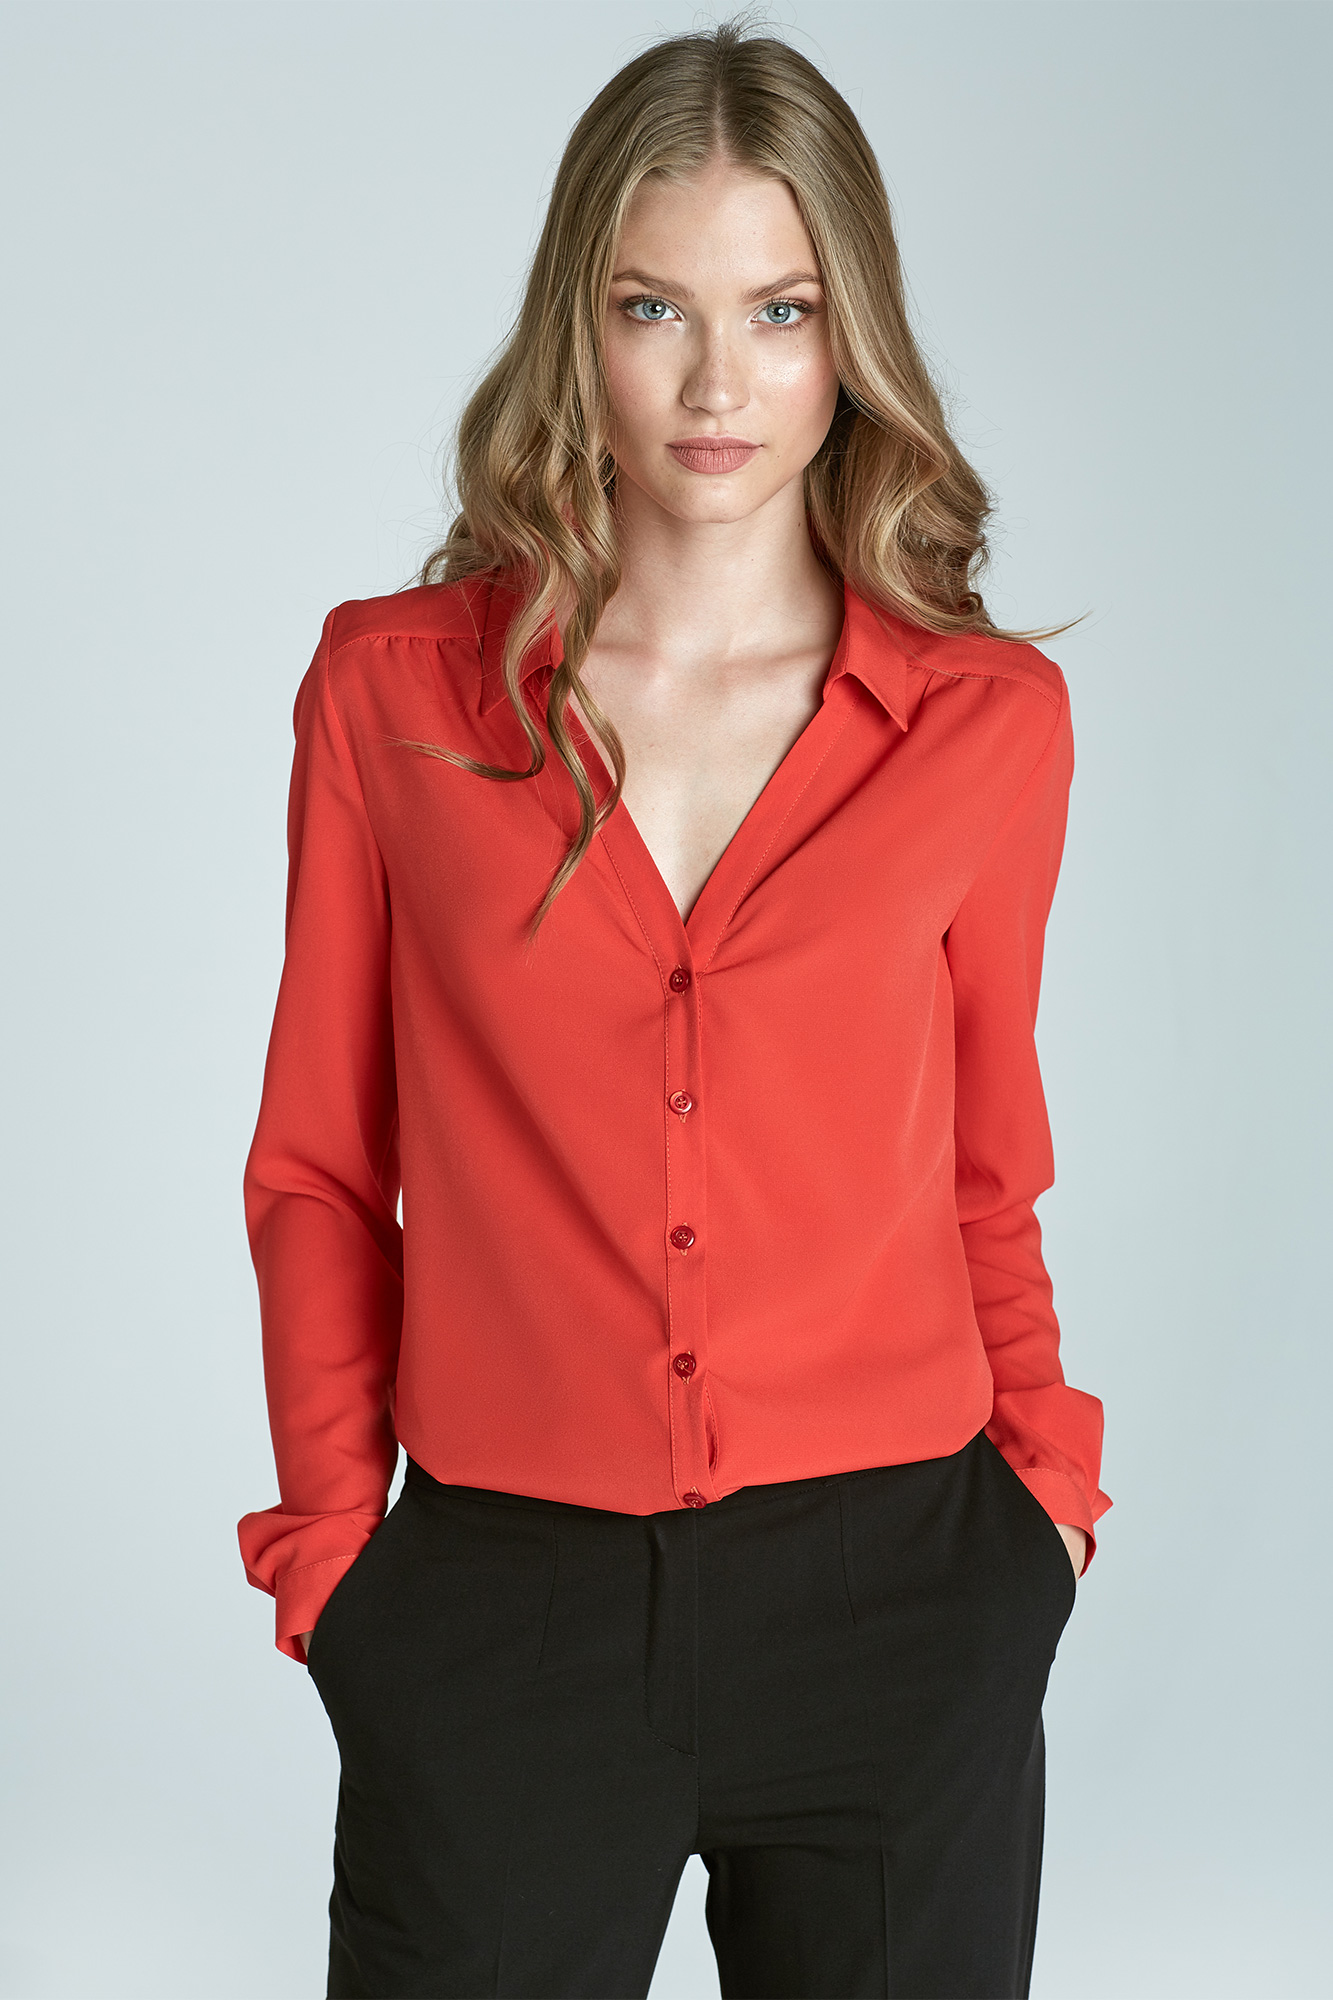 Coral-colored low-cut blouse